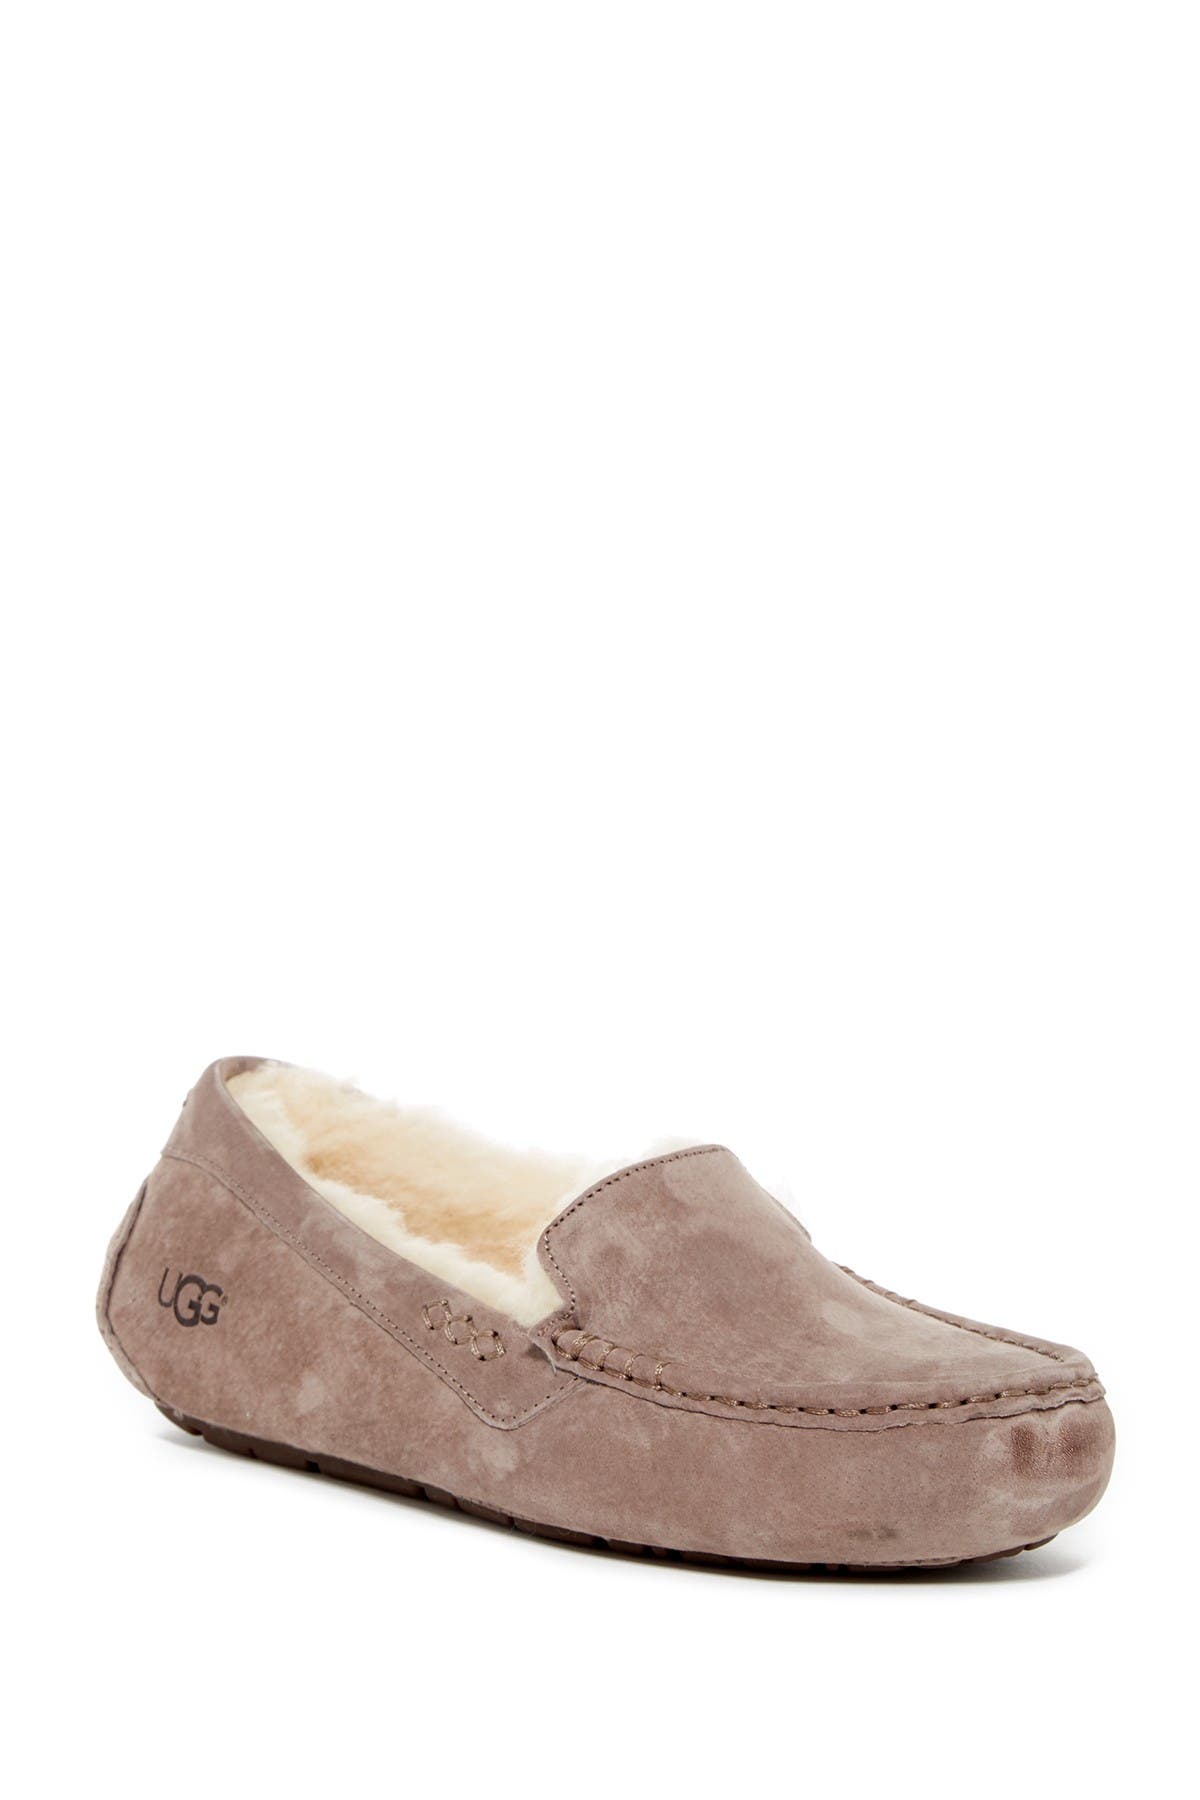 uggs womens slippers nordstrom